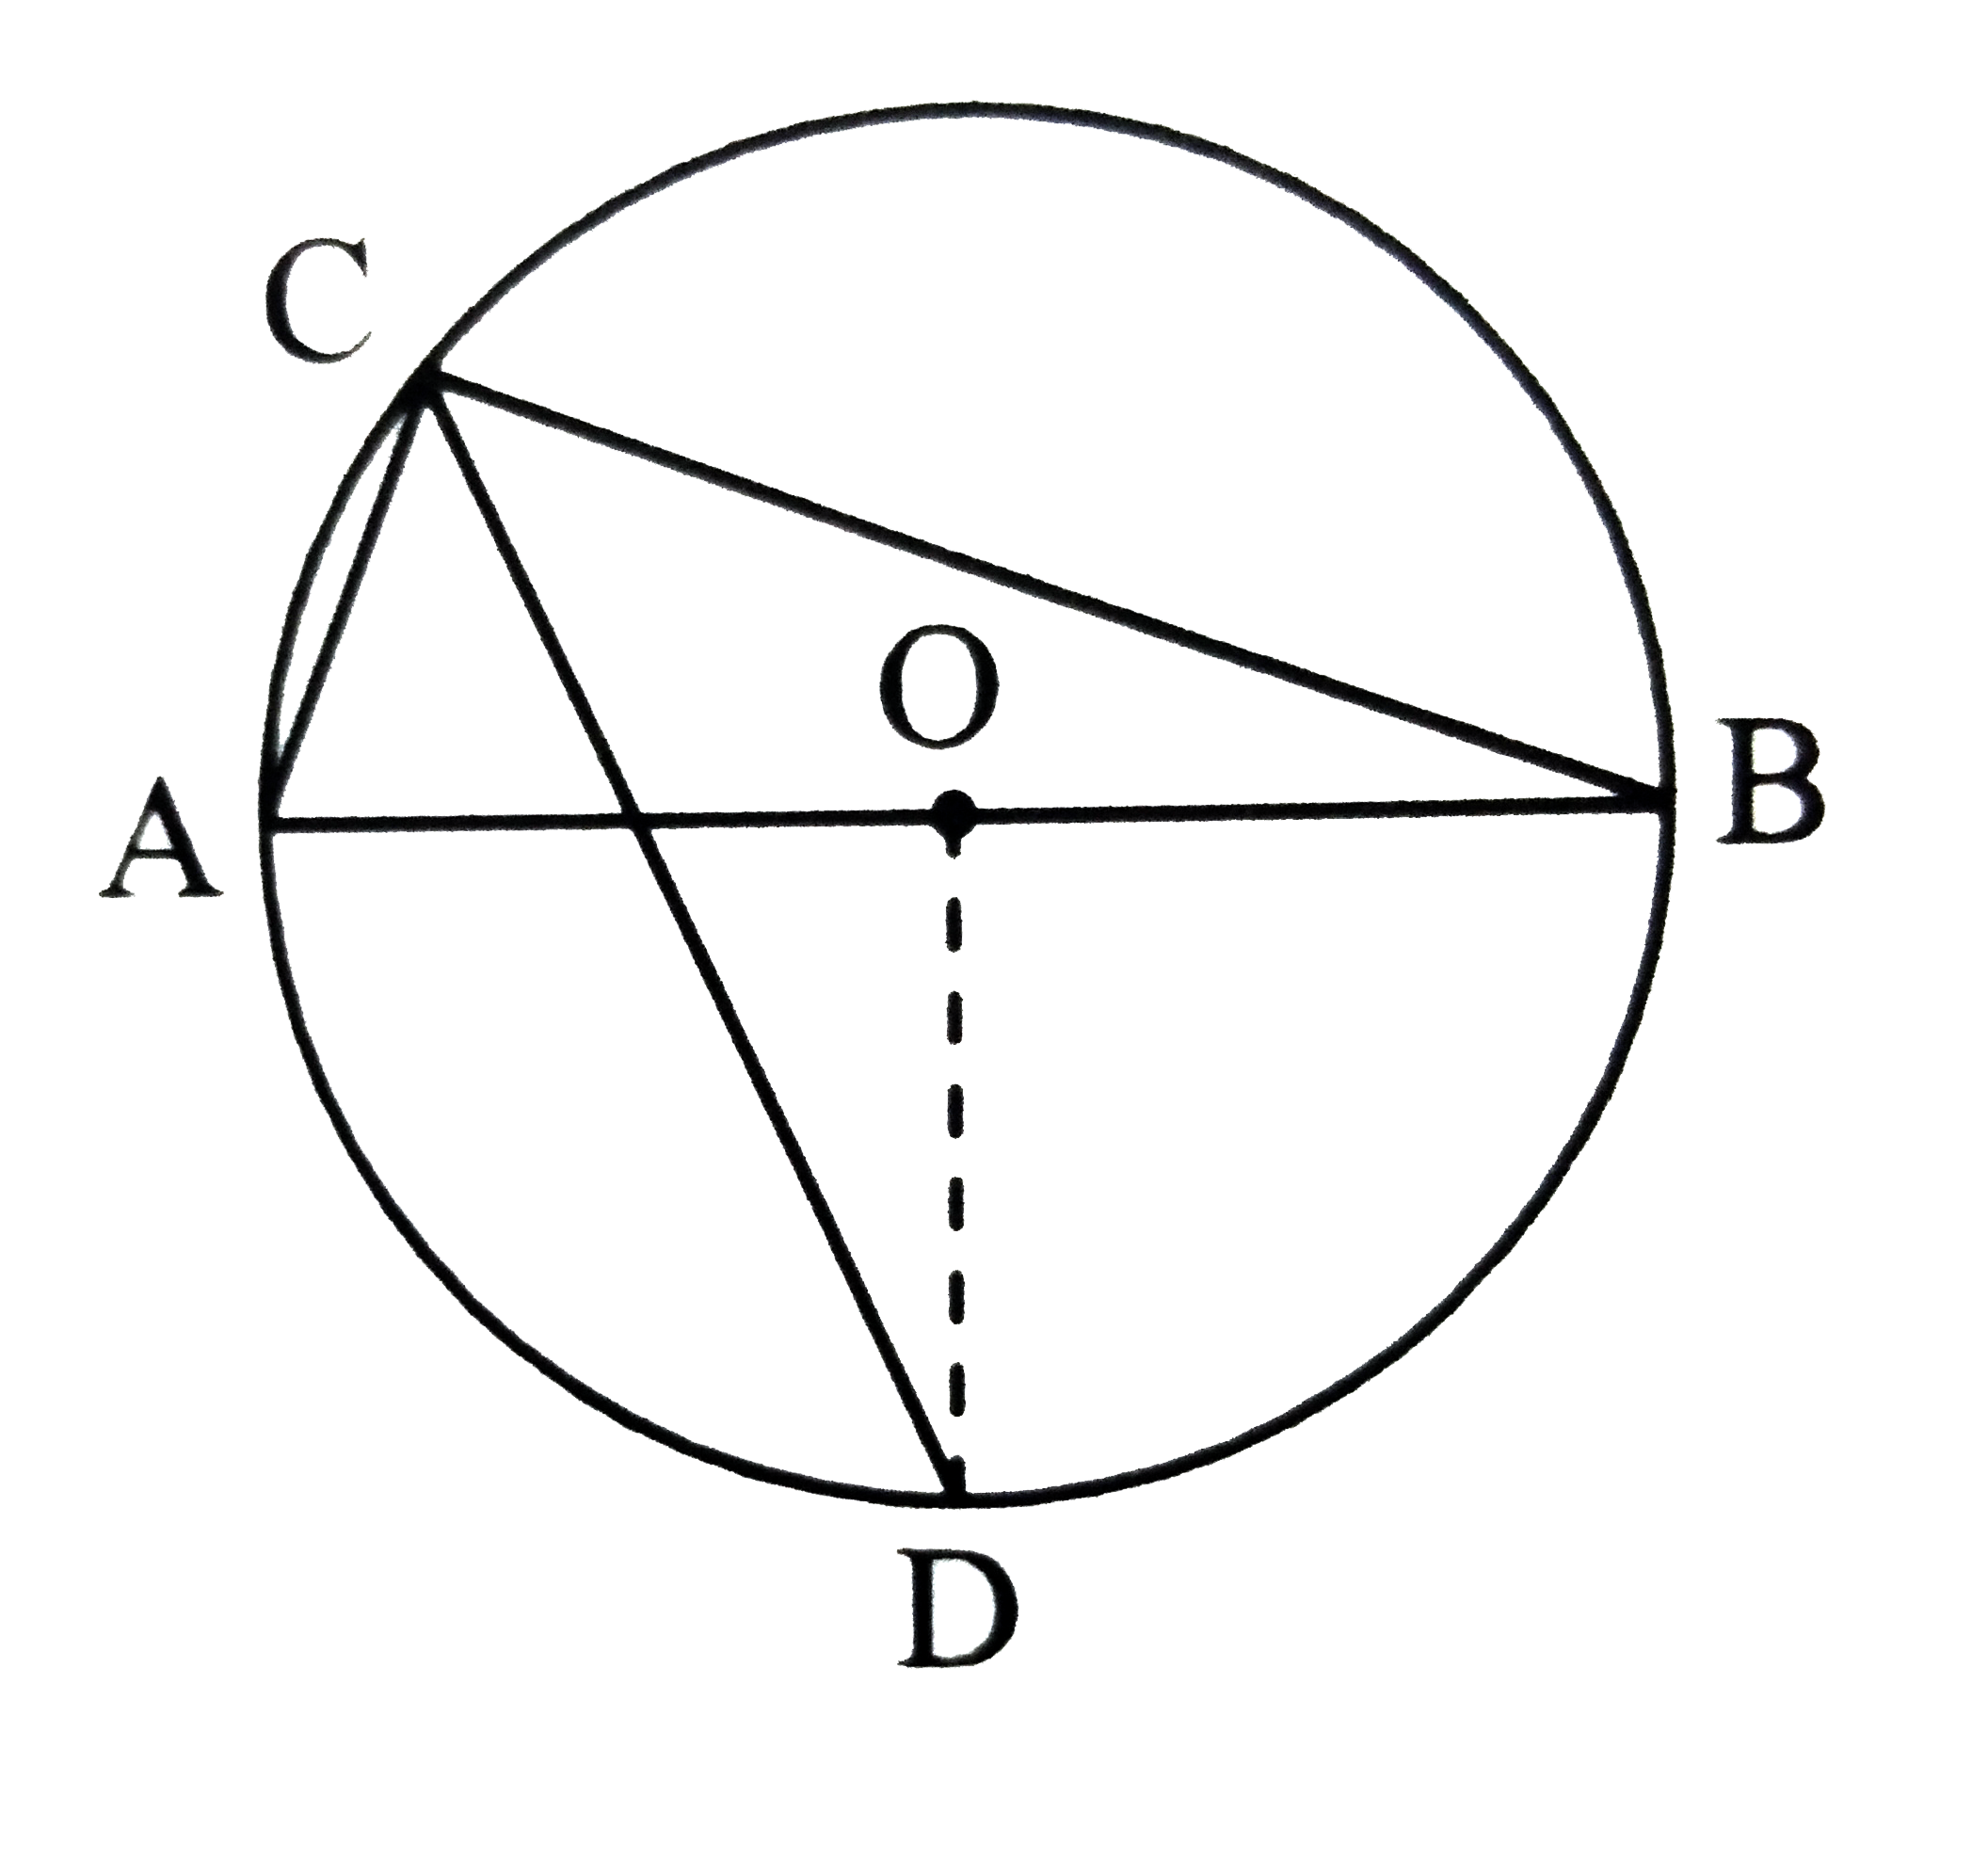 In the adjoining figure, seg AB is a diameter of a circle with centre O. the bisector of angleACB intersects the circle at point D.   Prove that ,seg ADcongseg BD.